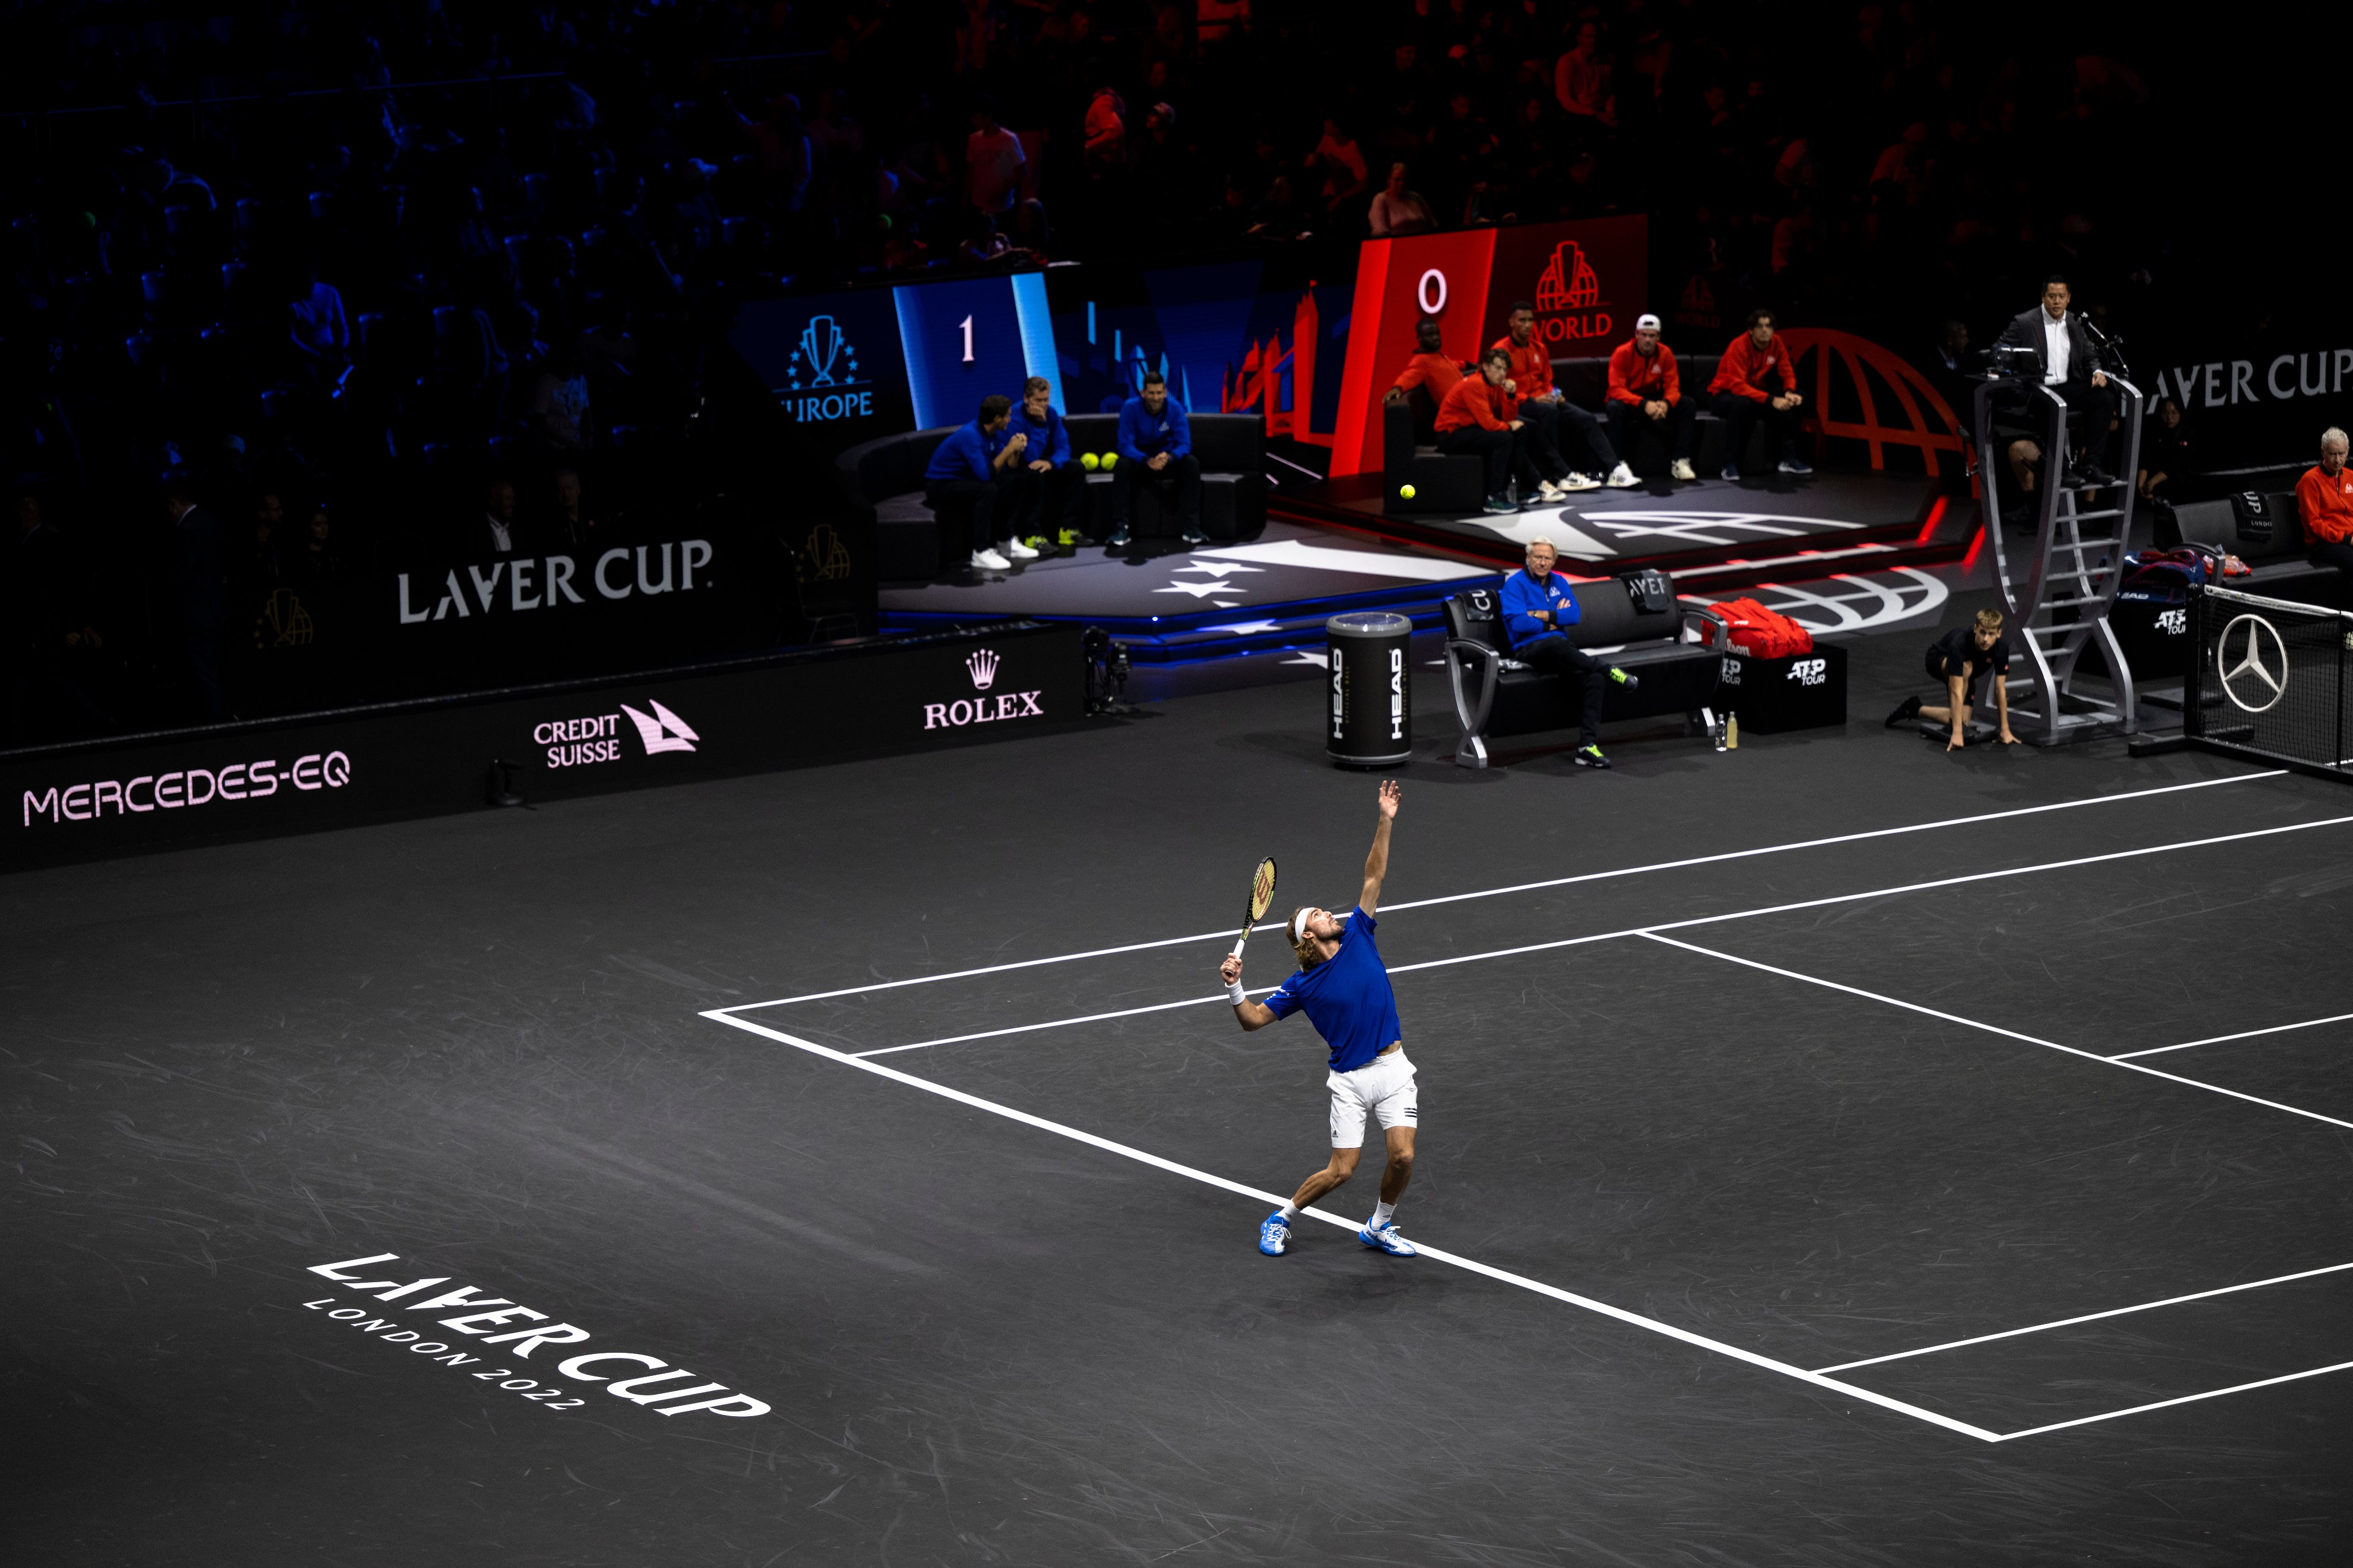 Laver Cup A tribute to the best in tennis